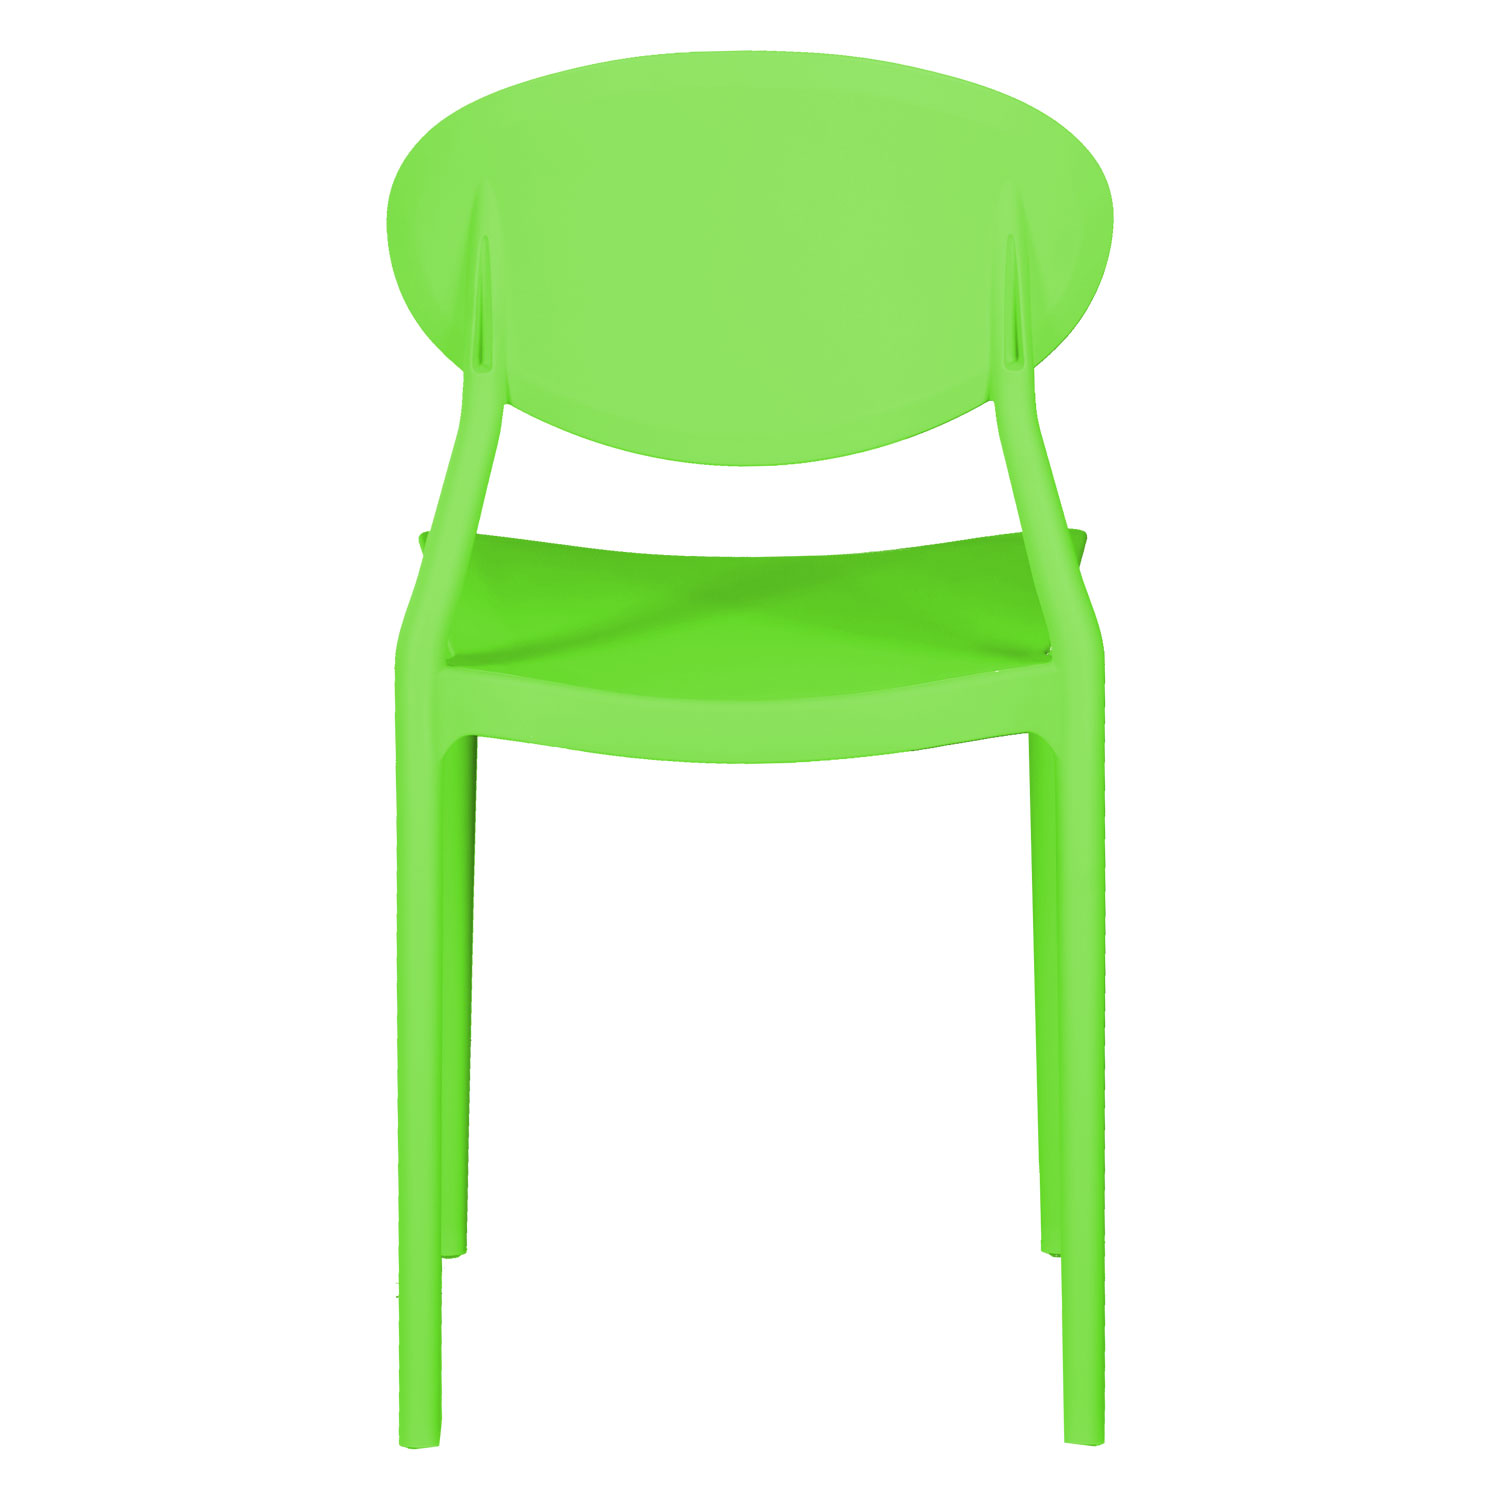 Garden chair Set of 4 Camping chairs Green Outdoor chairs Plastic Stacking chairs Kitchen chairs